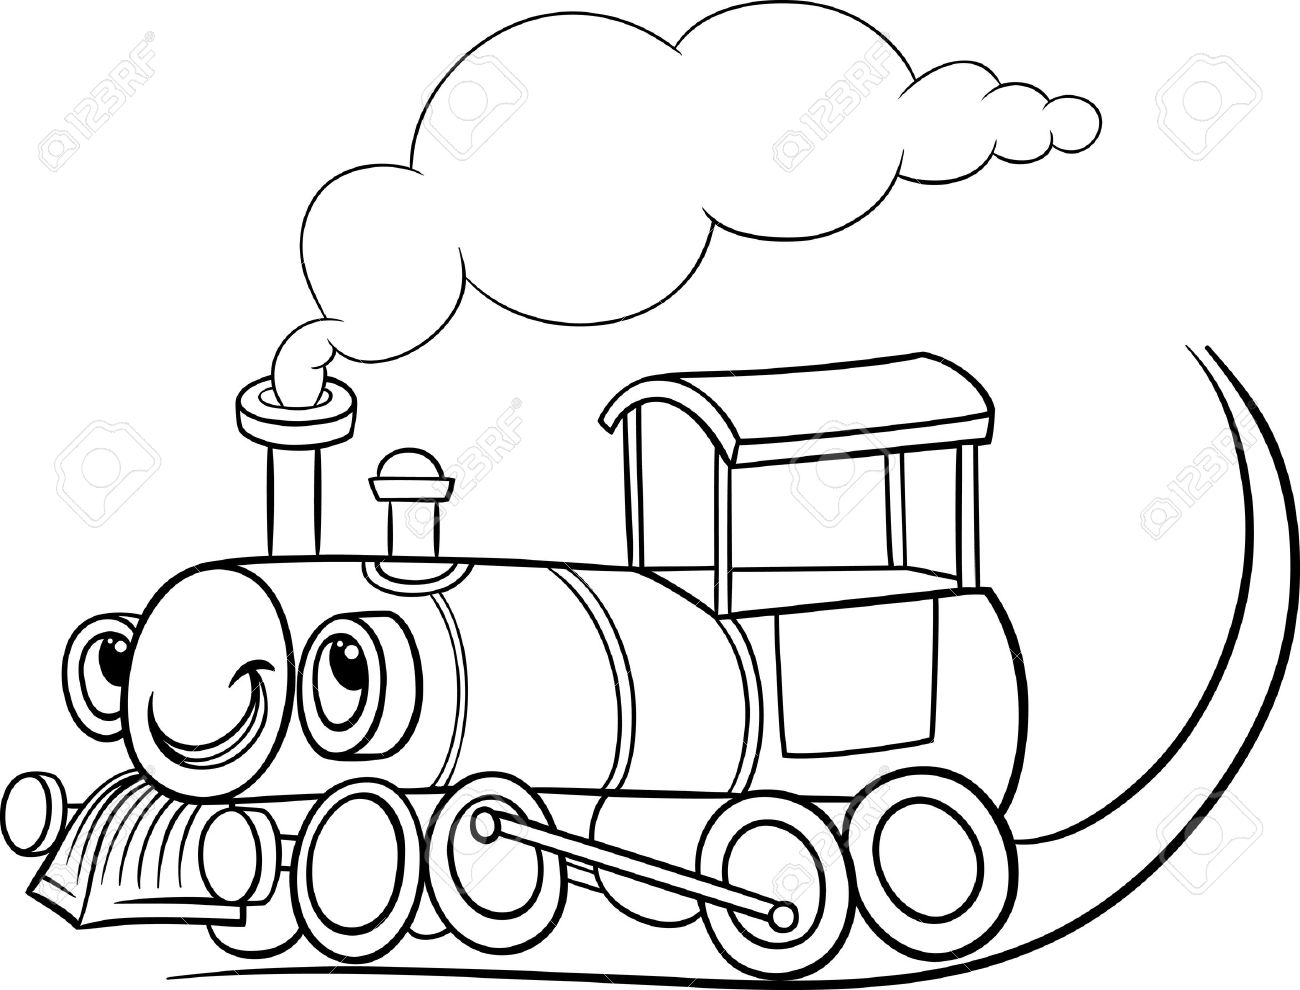 engine clipart black and white